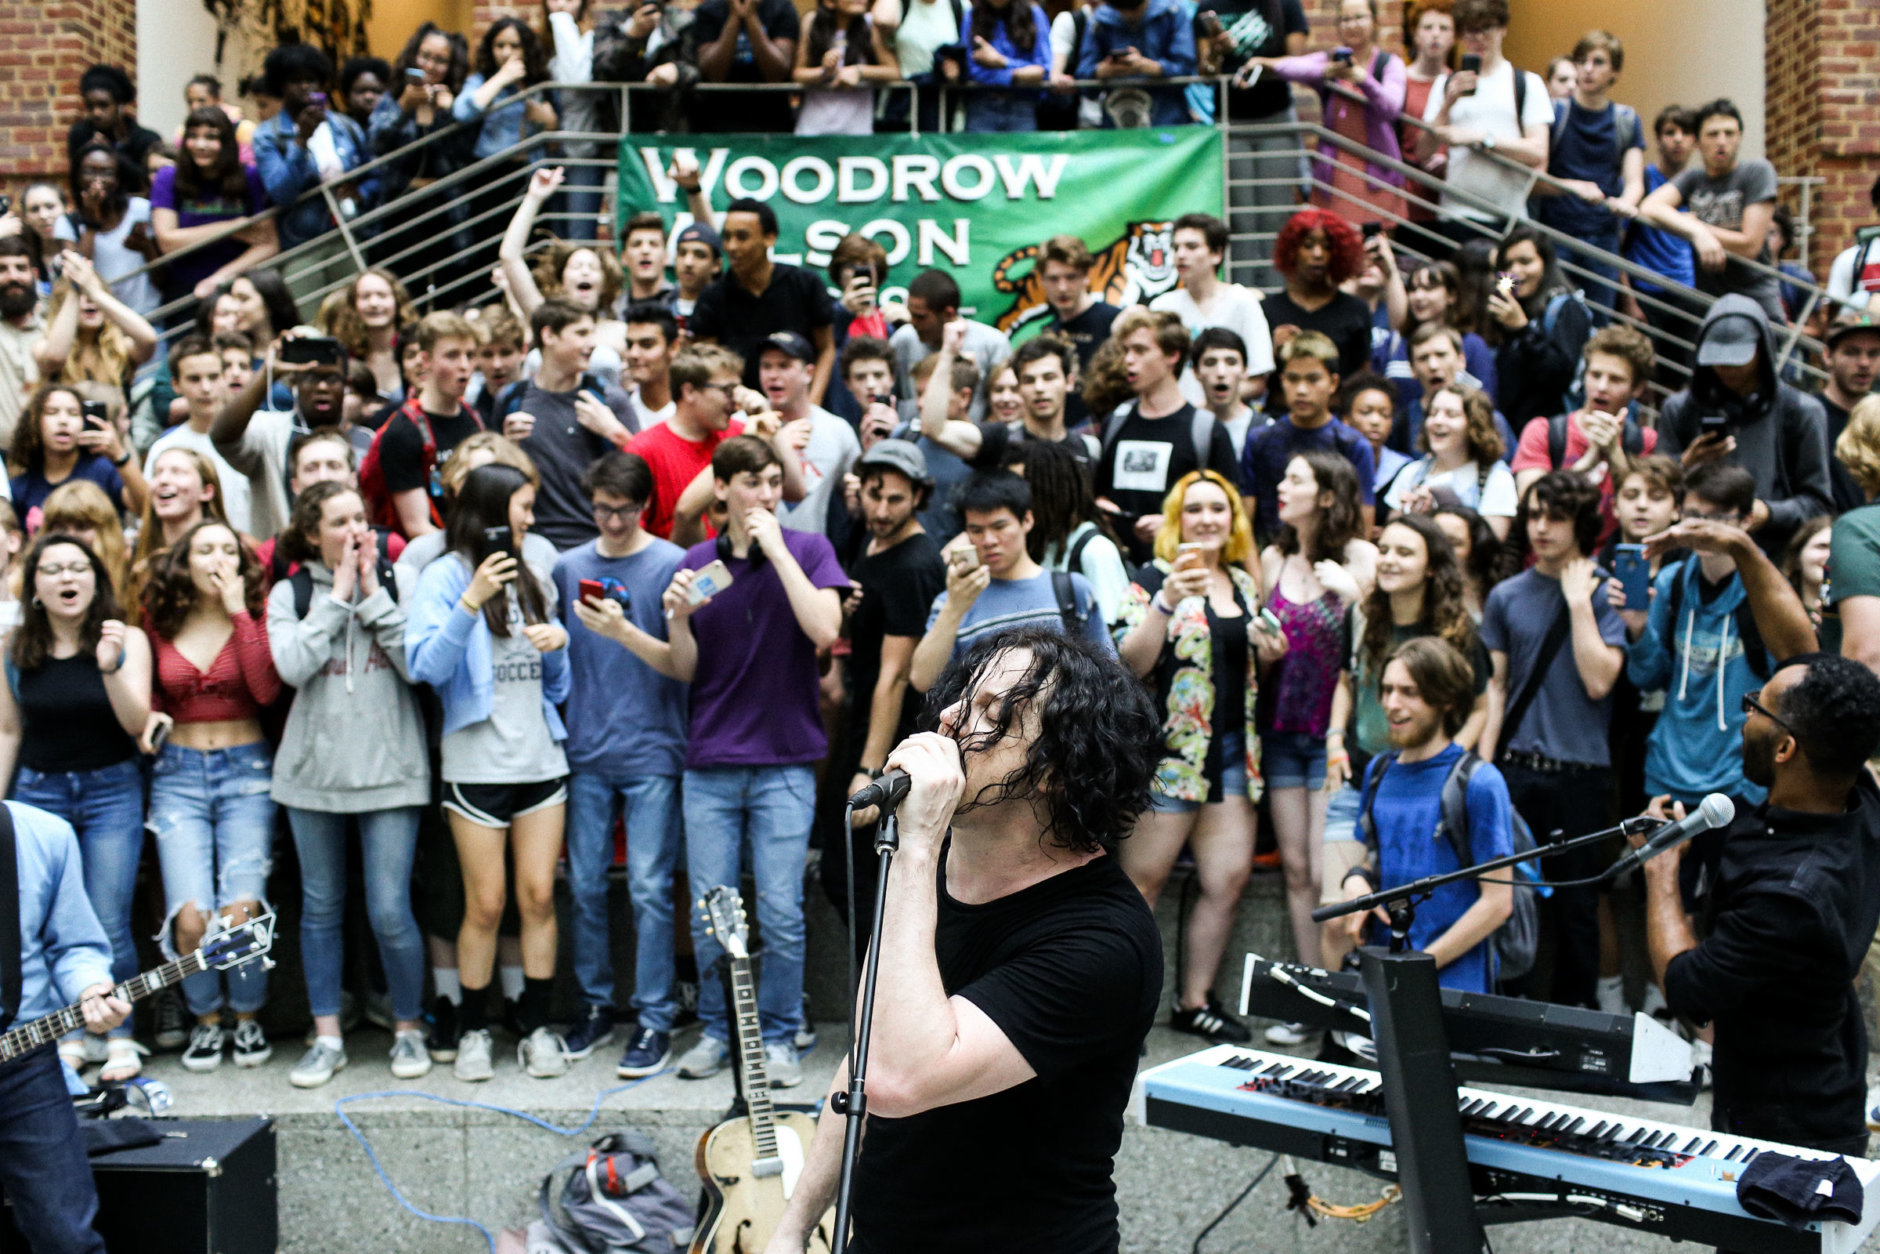 Jack White plays a surprise concert for D.C.'s Woodrow Wilson High School on Wednesday. (David James Swanson)